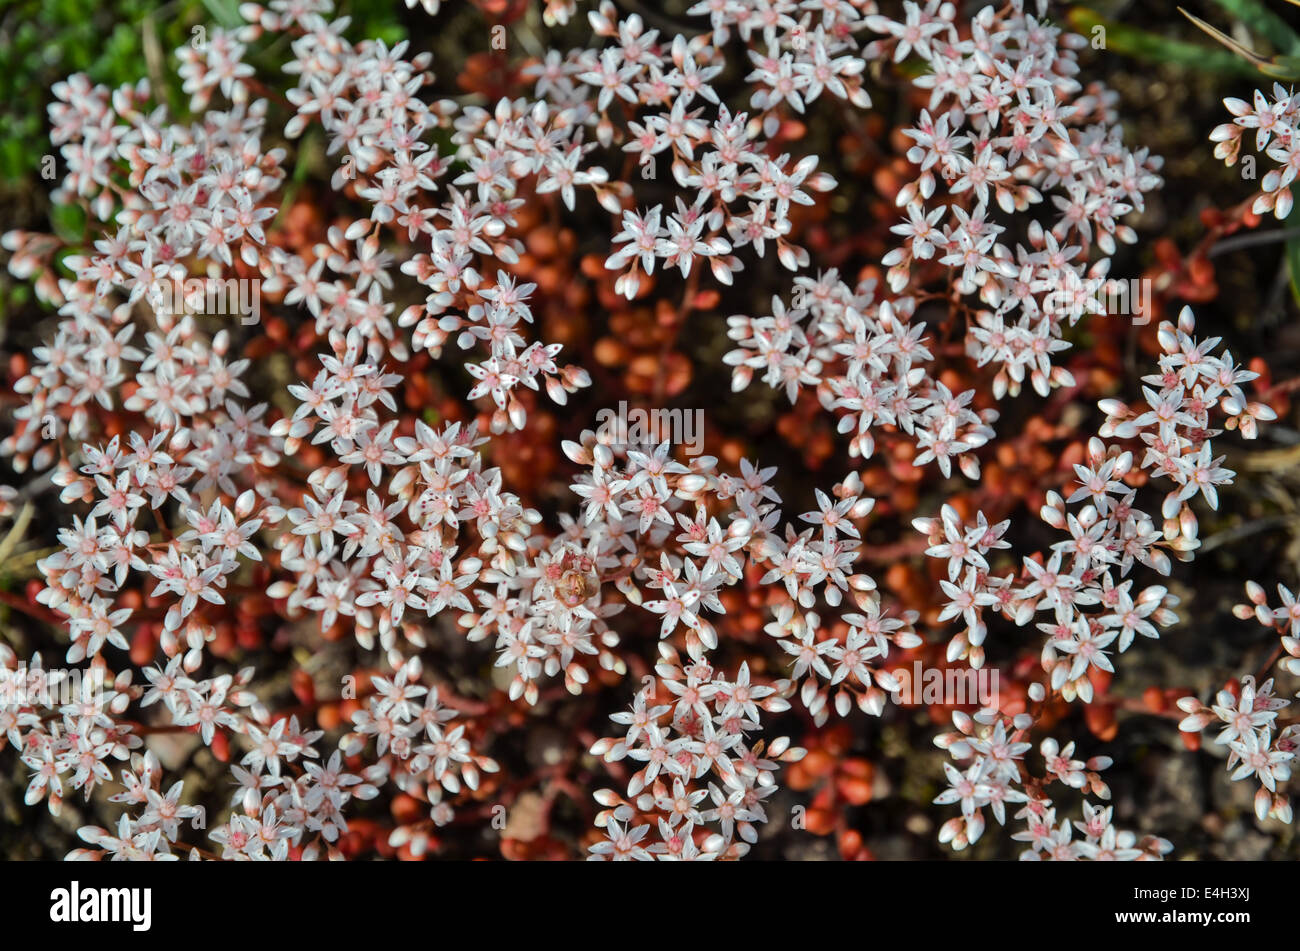 Background of blossom white stonecrop plants Stock Photo